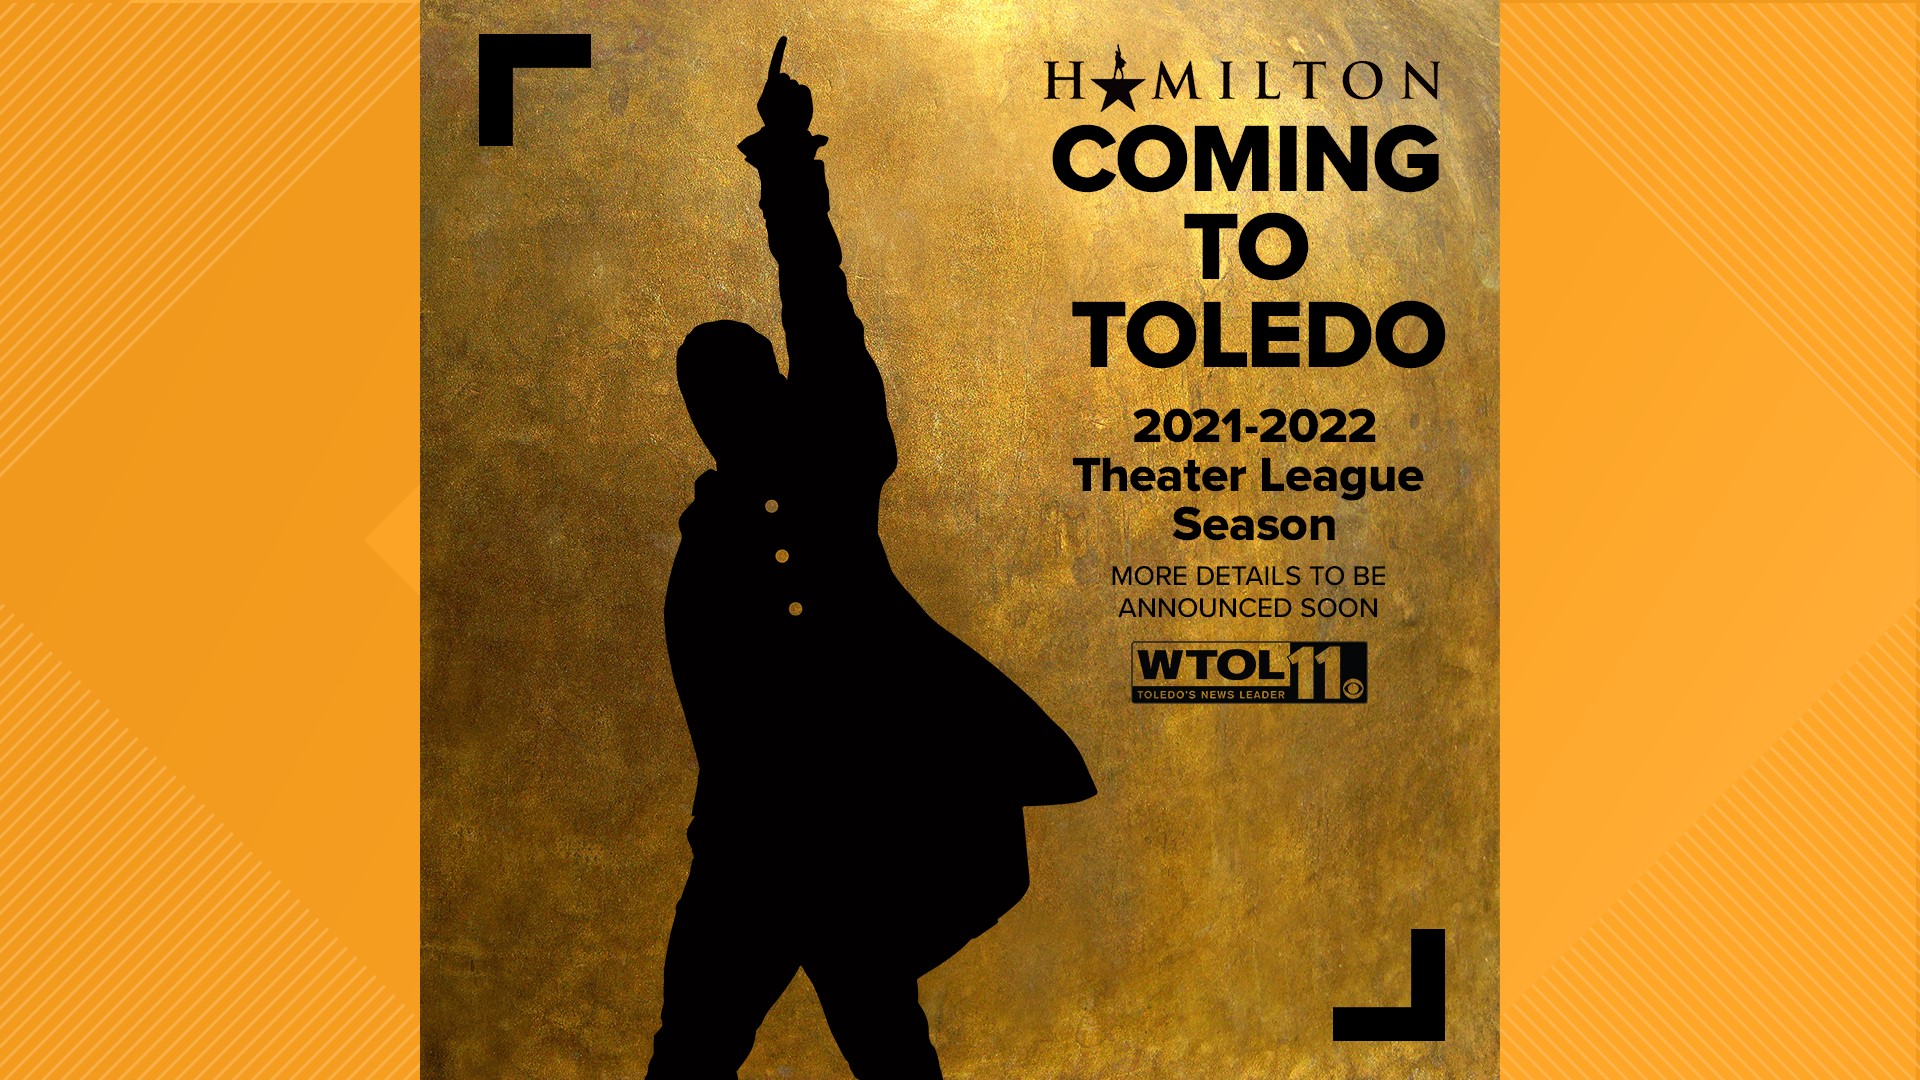 Theater League advises that 2020-2021 season membership holders will be able to guarantee their seats when they renew their membership.